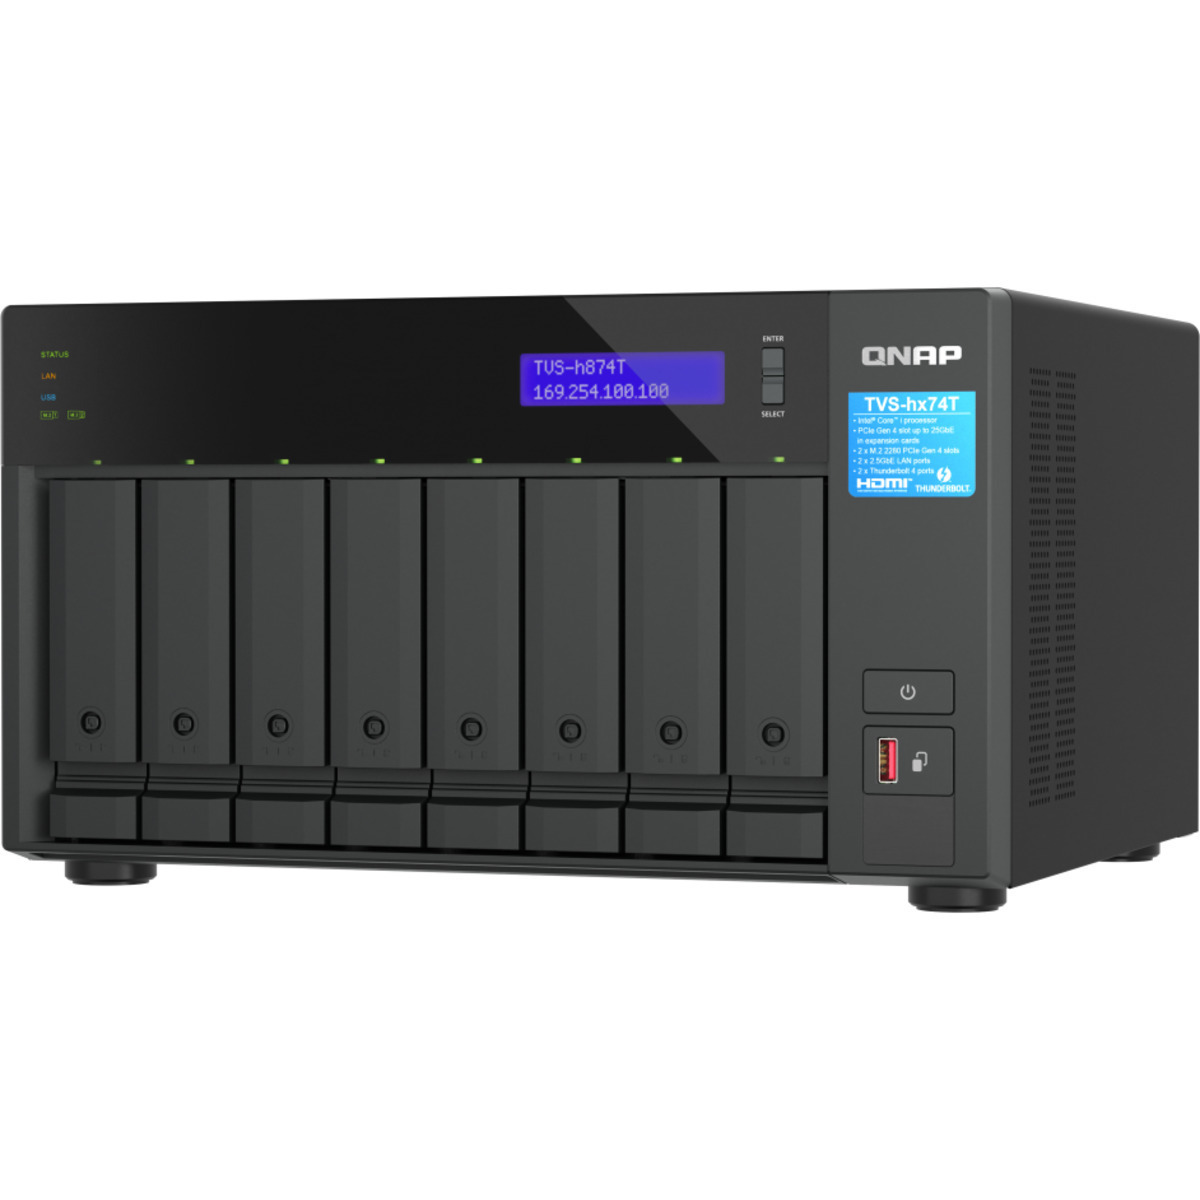 QNAP TVS-h874T Core i7 Thunderbolt 4 48tb 8-Bay Desktop Multimedia / Power User / Business DAS-NAS - Combo Direct + Network Storage Device 6x8tb Seagate IronWolf ST8000VN004 3.5 7200rpm SATA 6Gb/s HDD NAS Class Drives Installed - Burn-In Tested TVS-h874T Core i7 Thunderbolt 4